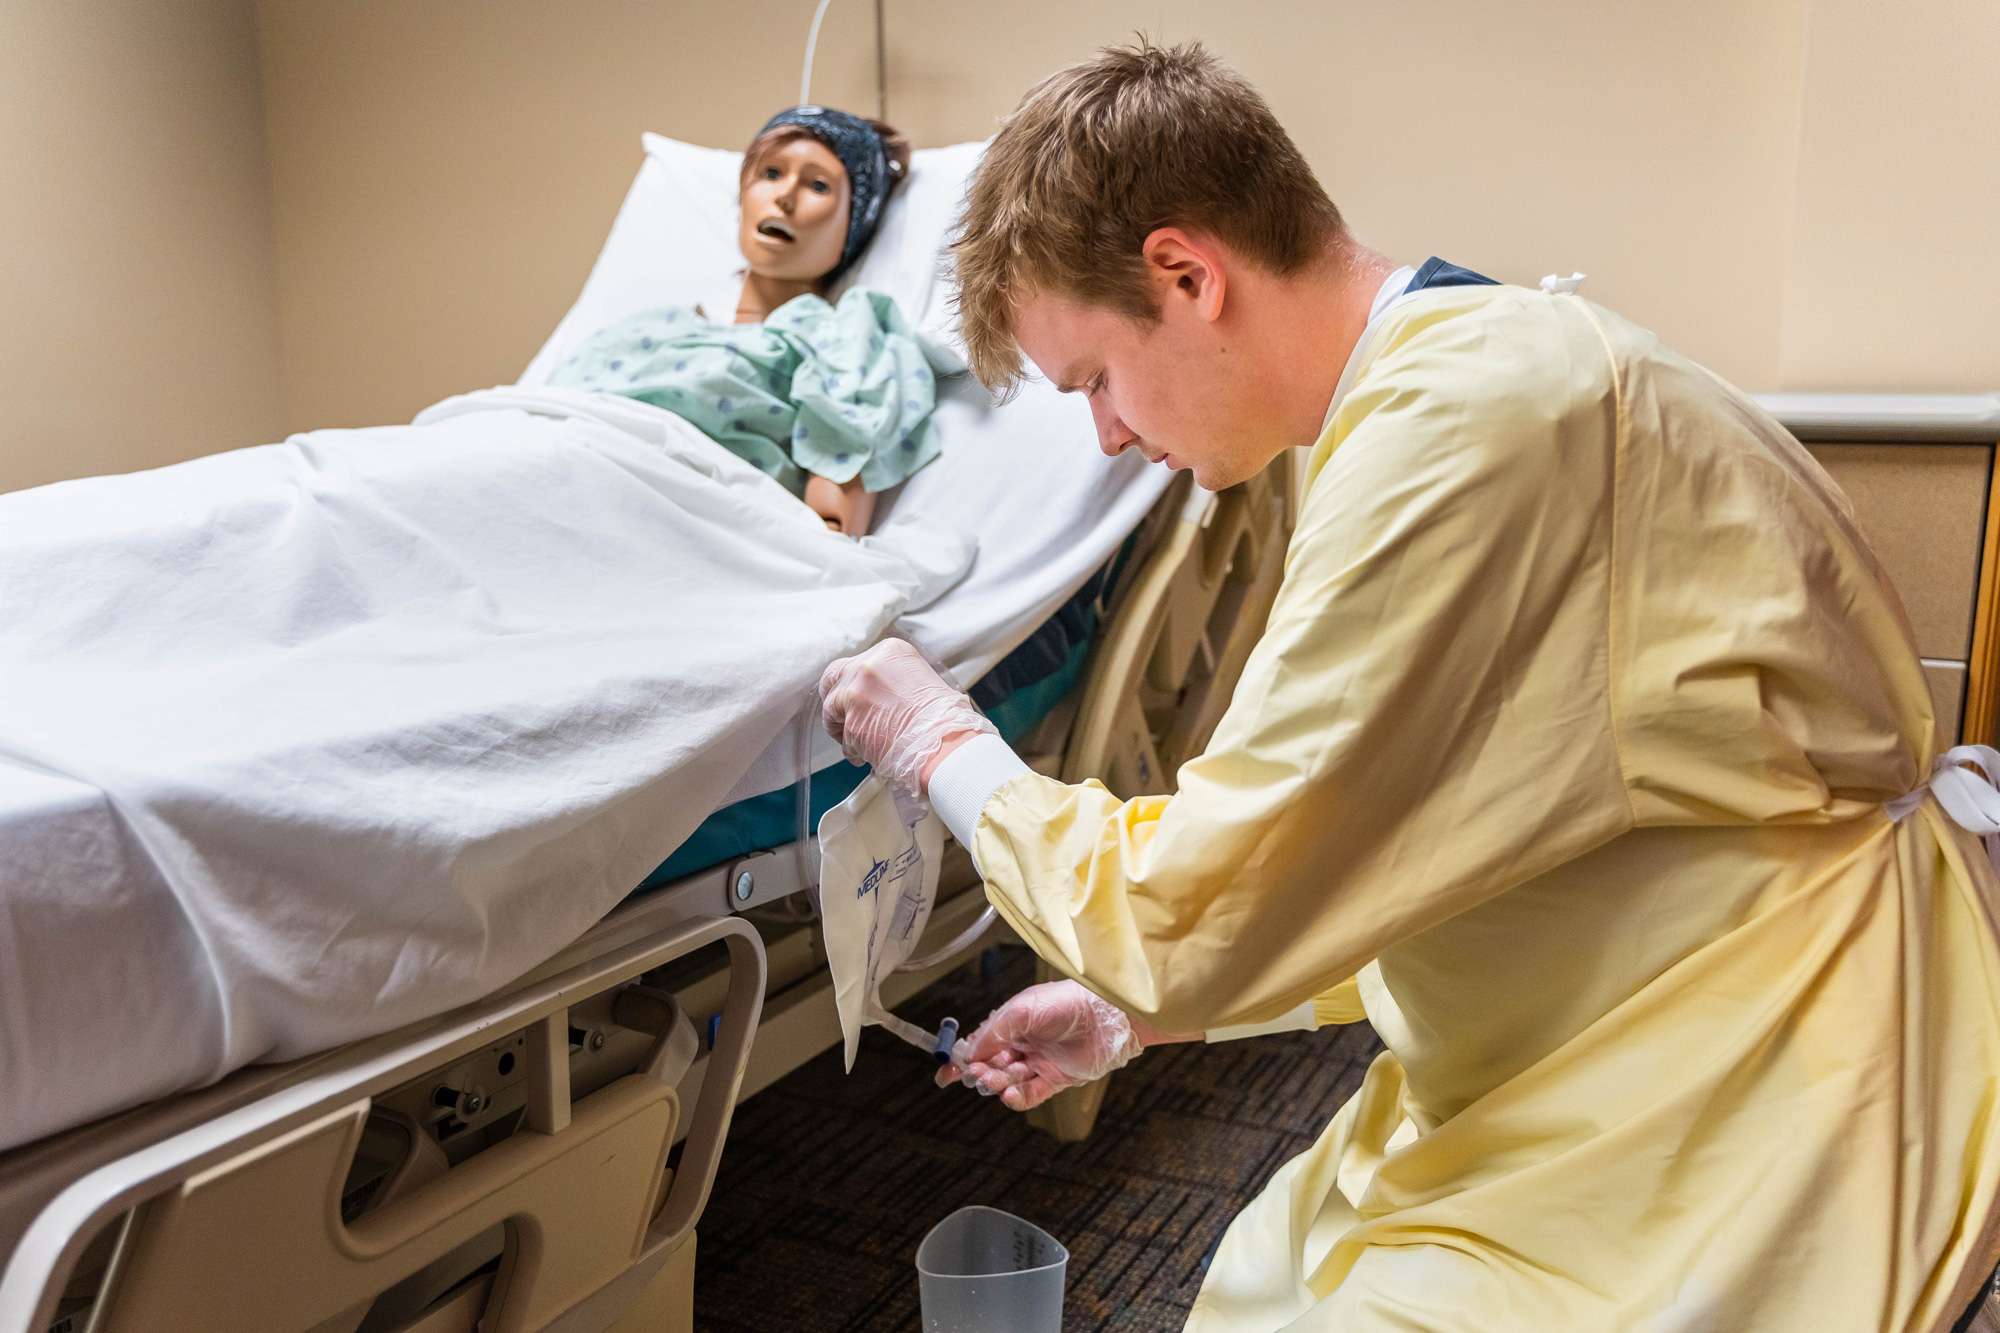 A Nursing Assistant empties out the contents of a colostomy bag into a container set on the floor next to a patient's bed.